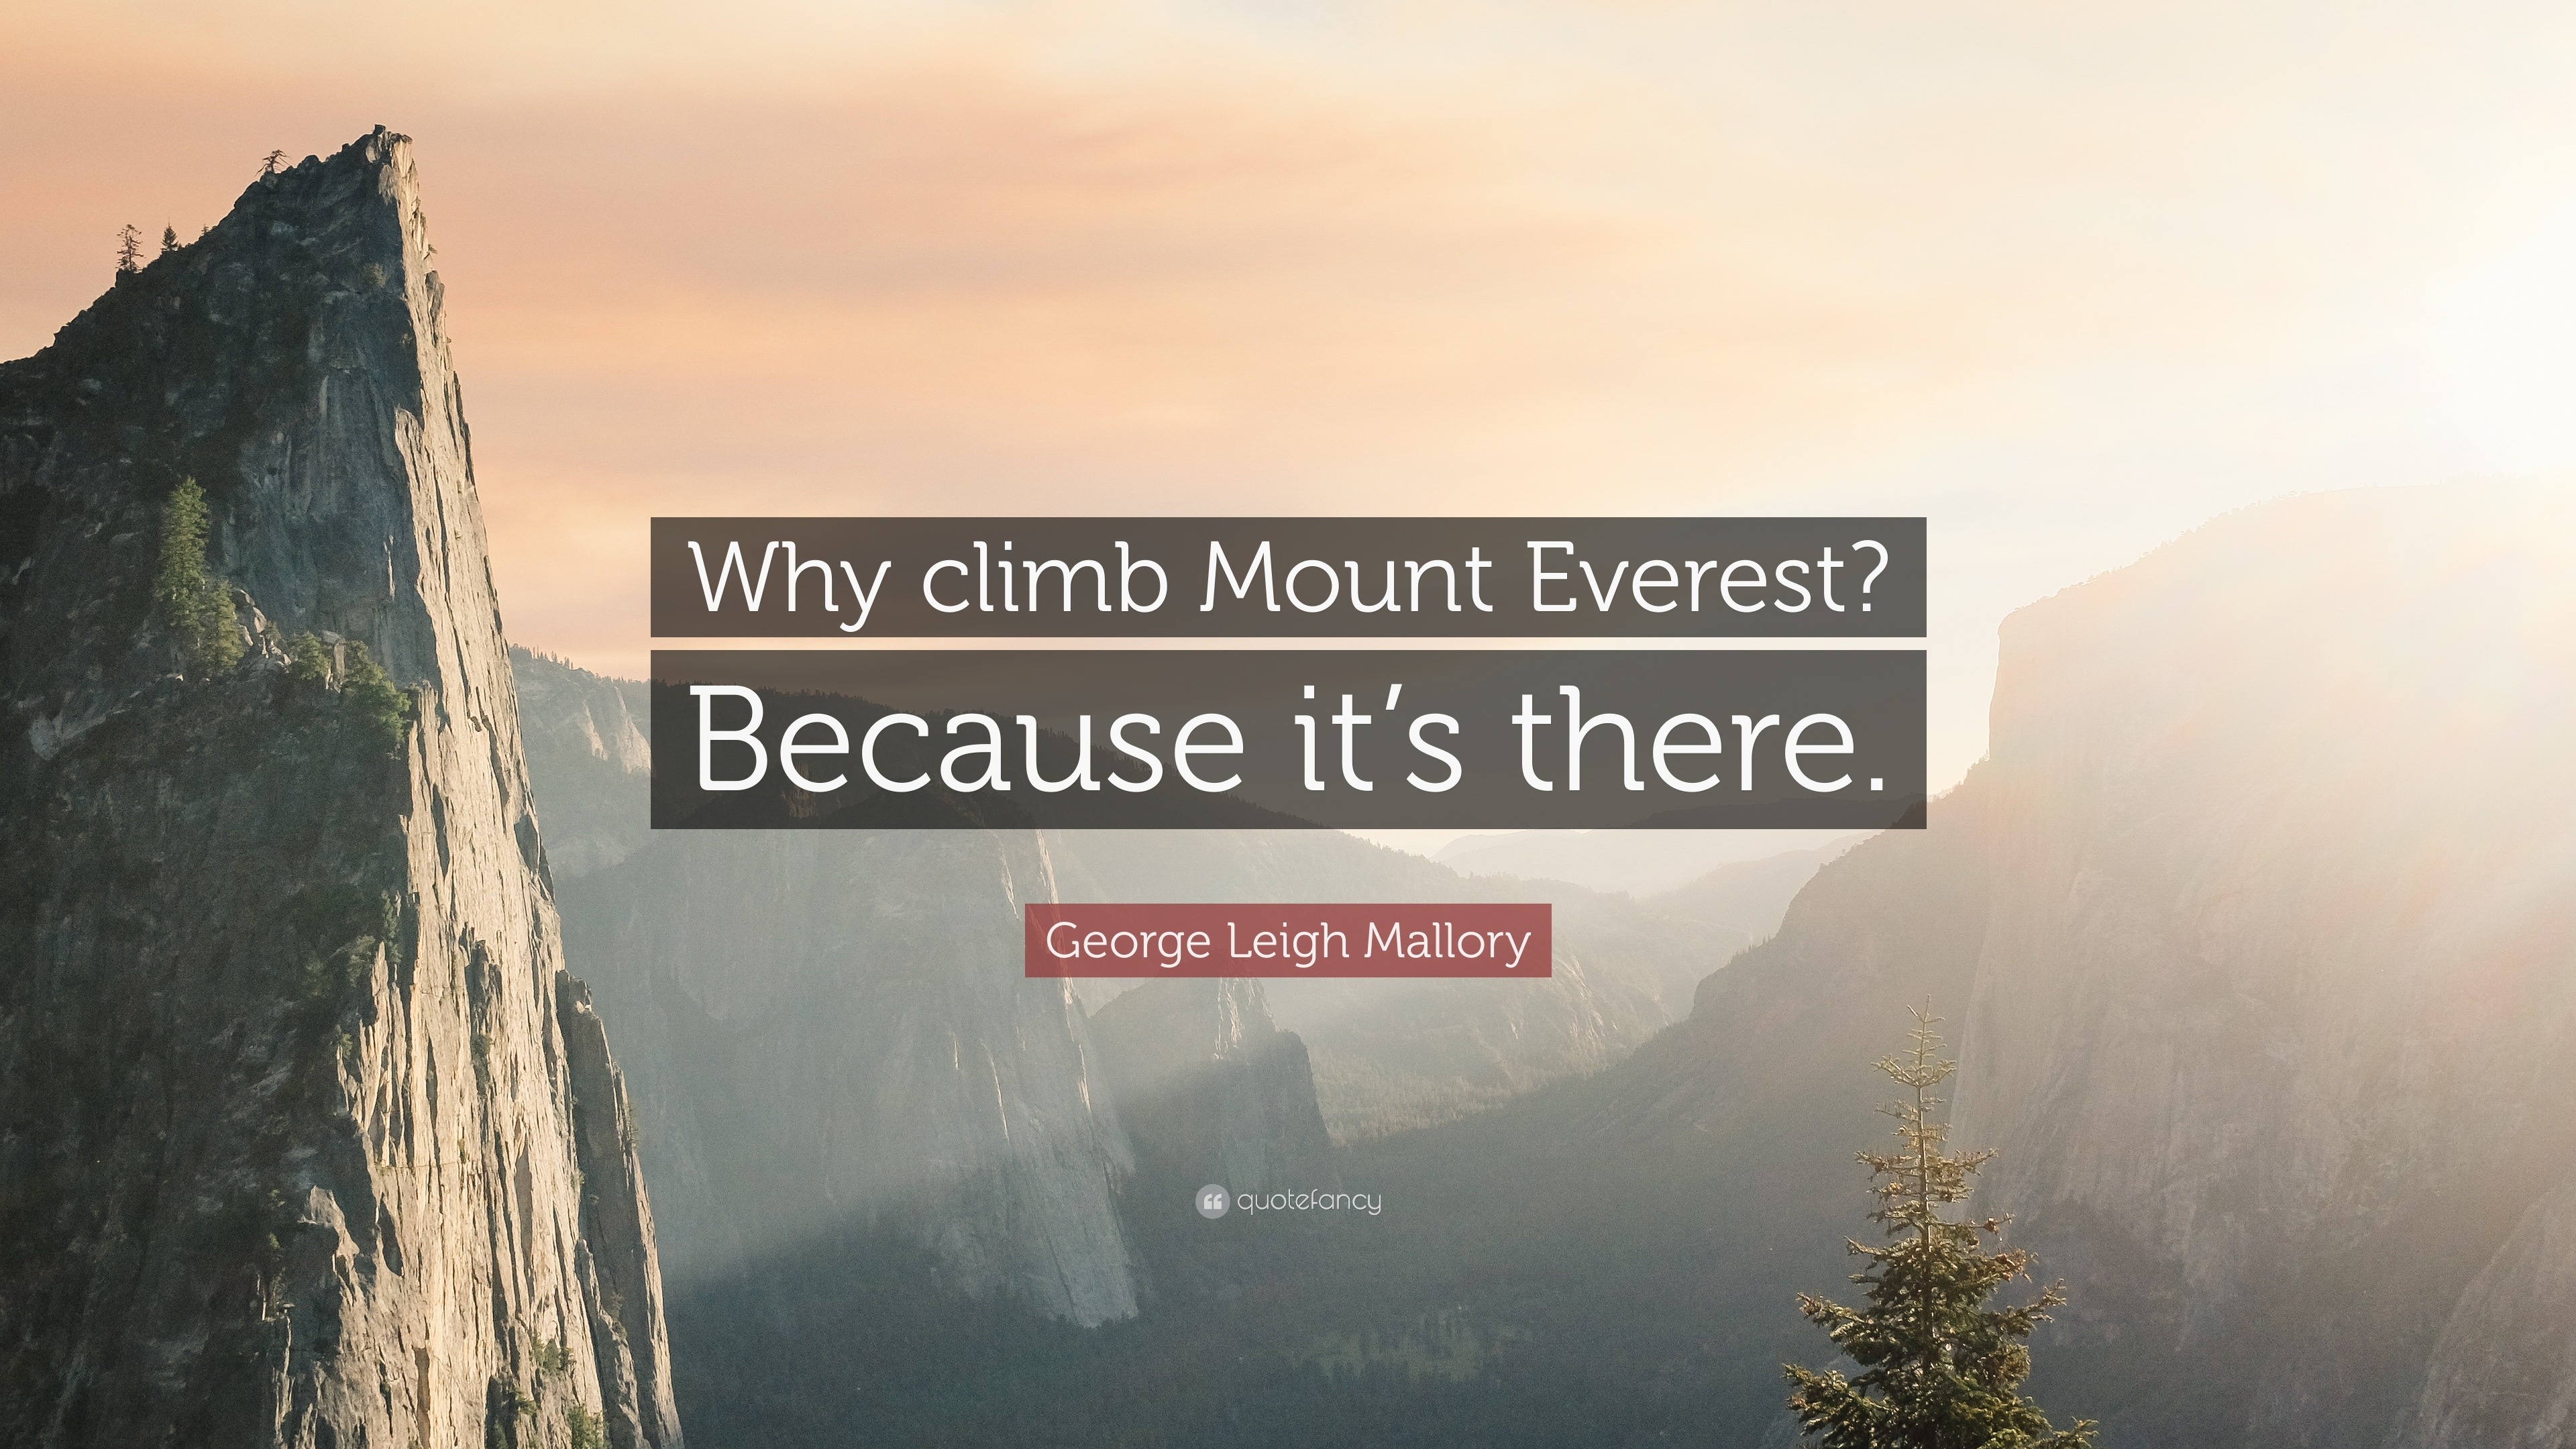 George Leigh Mallory Quote: “Why climb Mount Everest? Because it’s